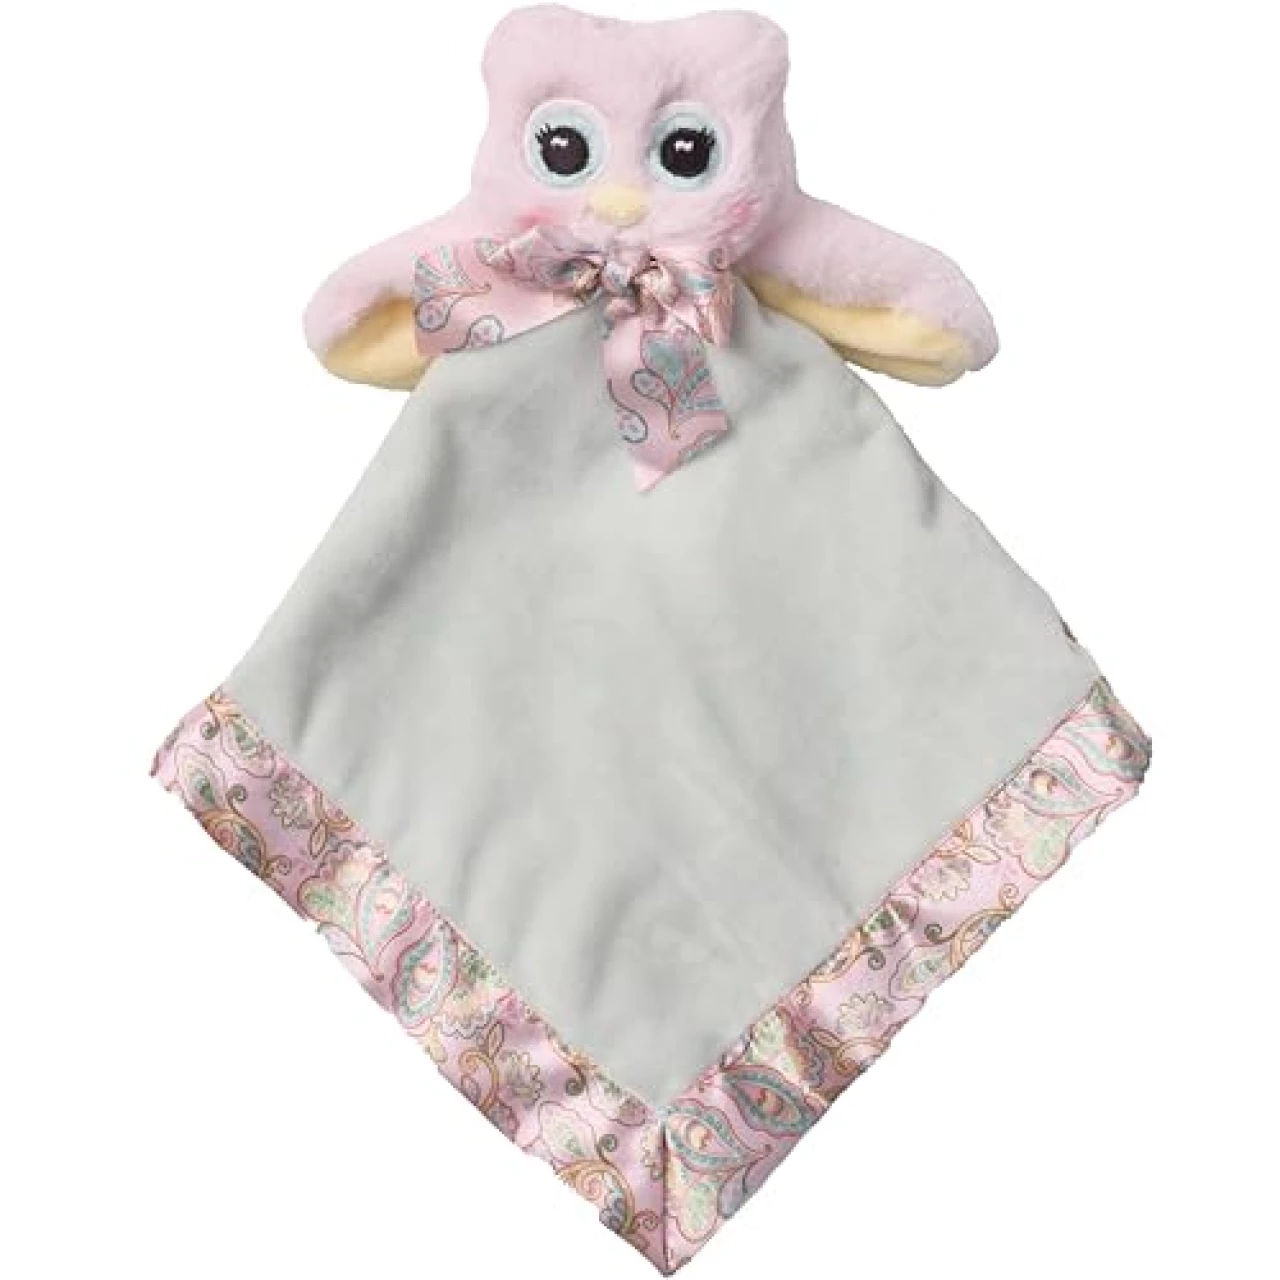 Bearington Baby Lil’ Hoots Snuggler, 15 Inch Pink Owl Plush Stuffed Animal Security Blanket Lovey for Babies